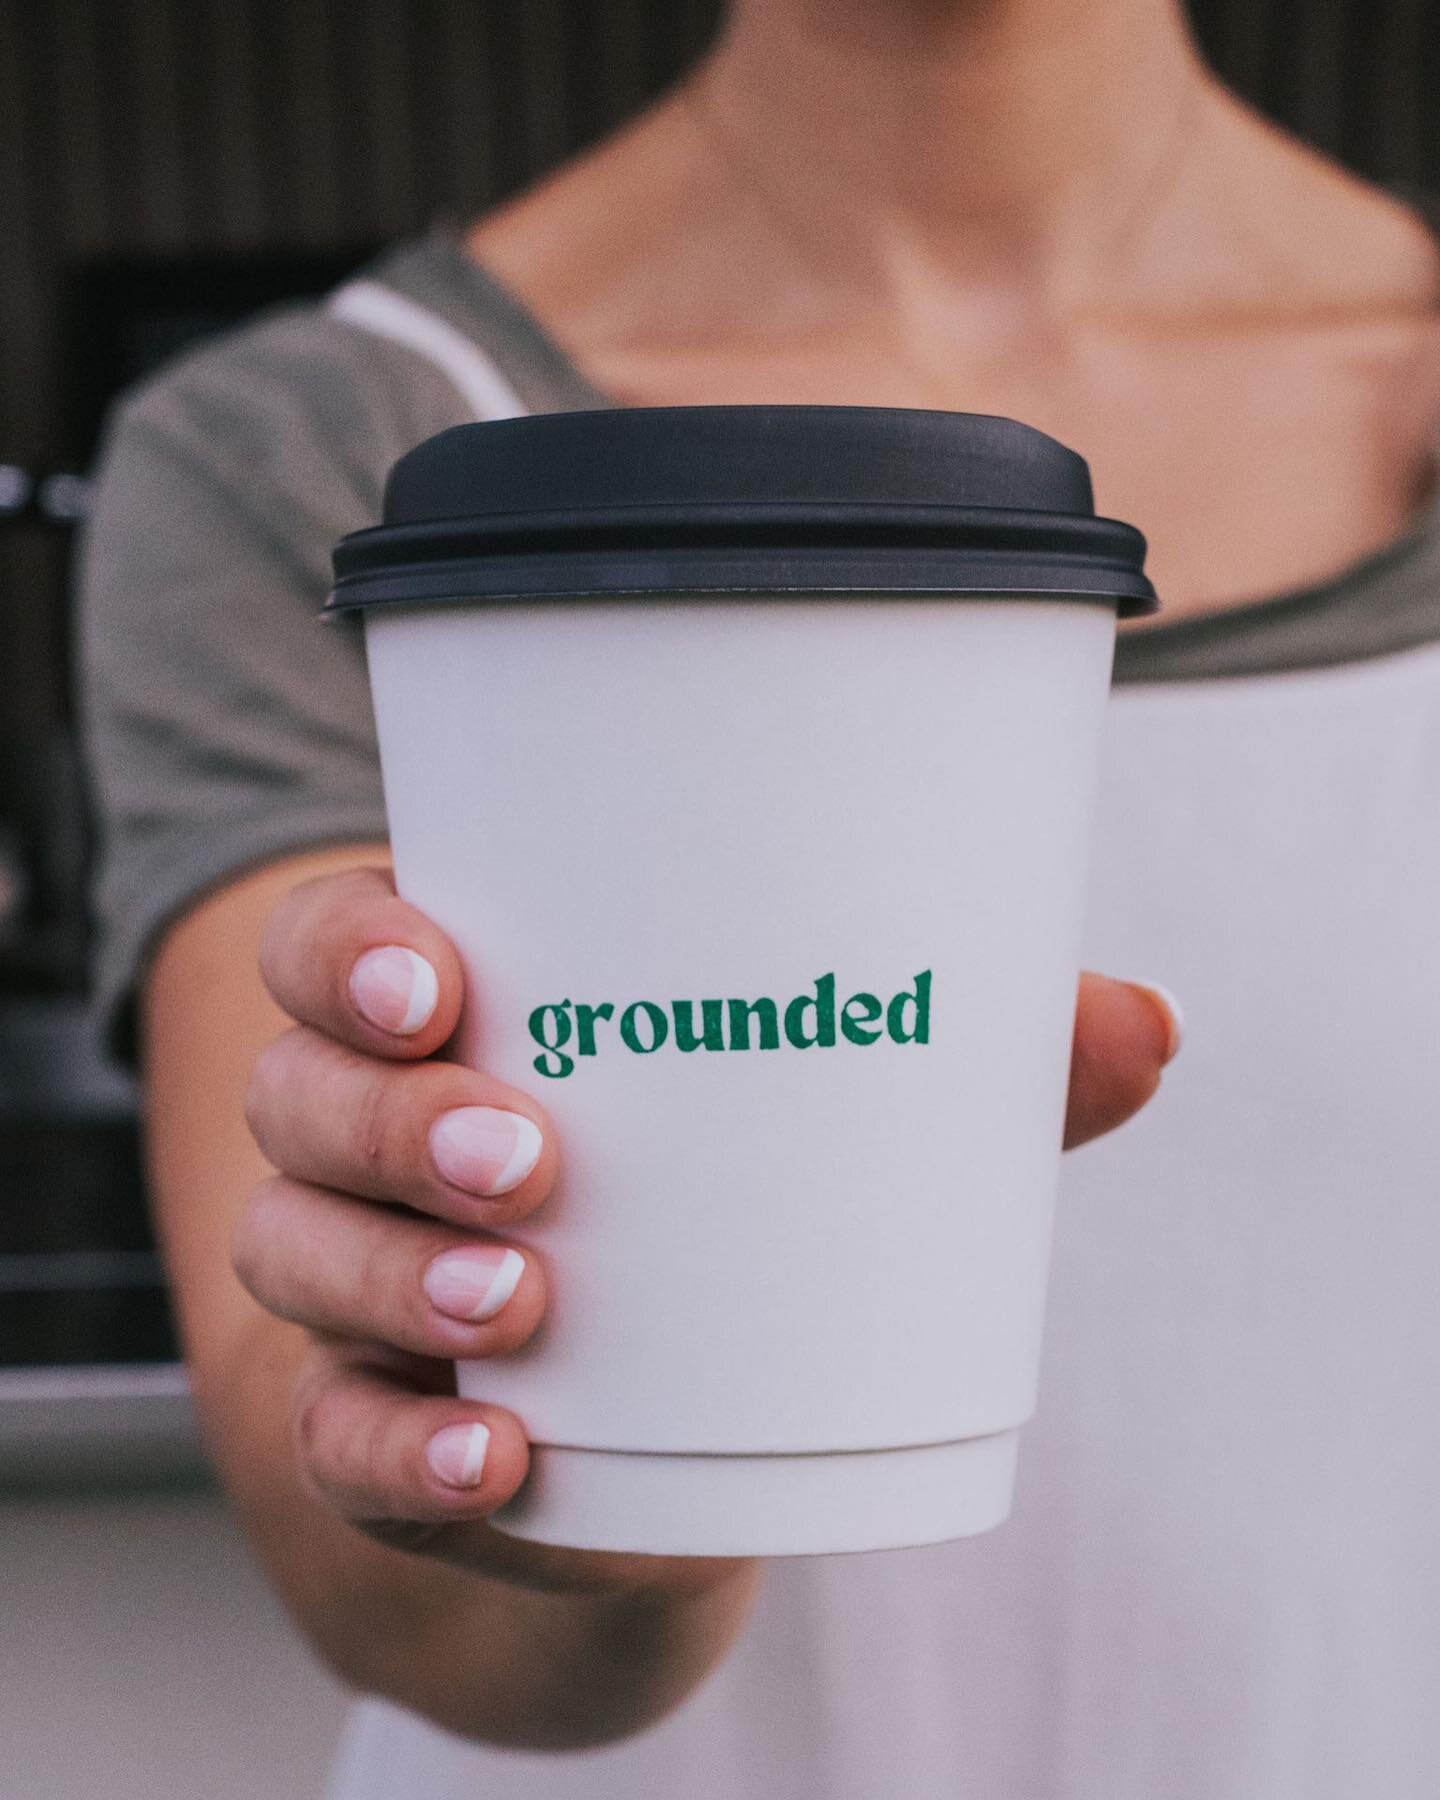 Monday Wholesale Partner Shout Out | Grounded.

Shanie lovingly serves a delicious cup of Coldblow along many other delicious treats from her pod over near Ebbsfleet. Shanie's focus is being mindful &amp; in doing so she is conscious about her supple